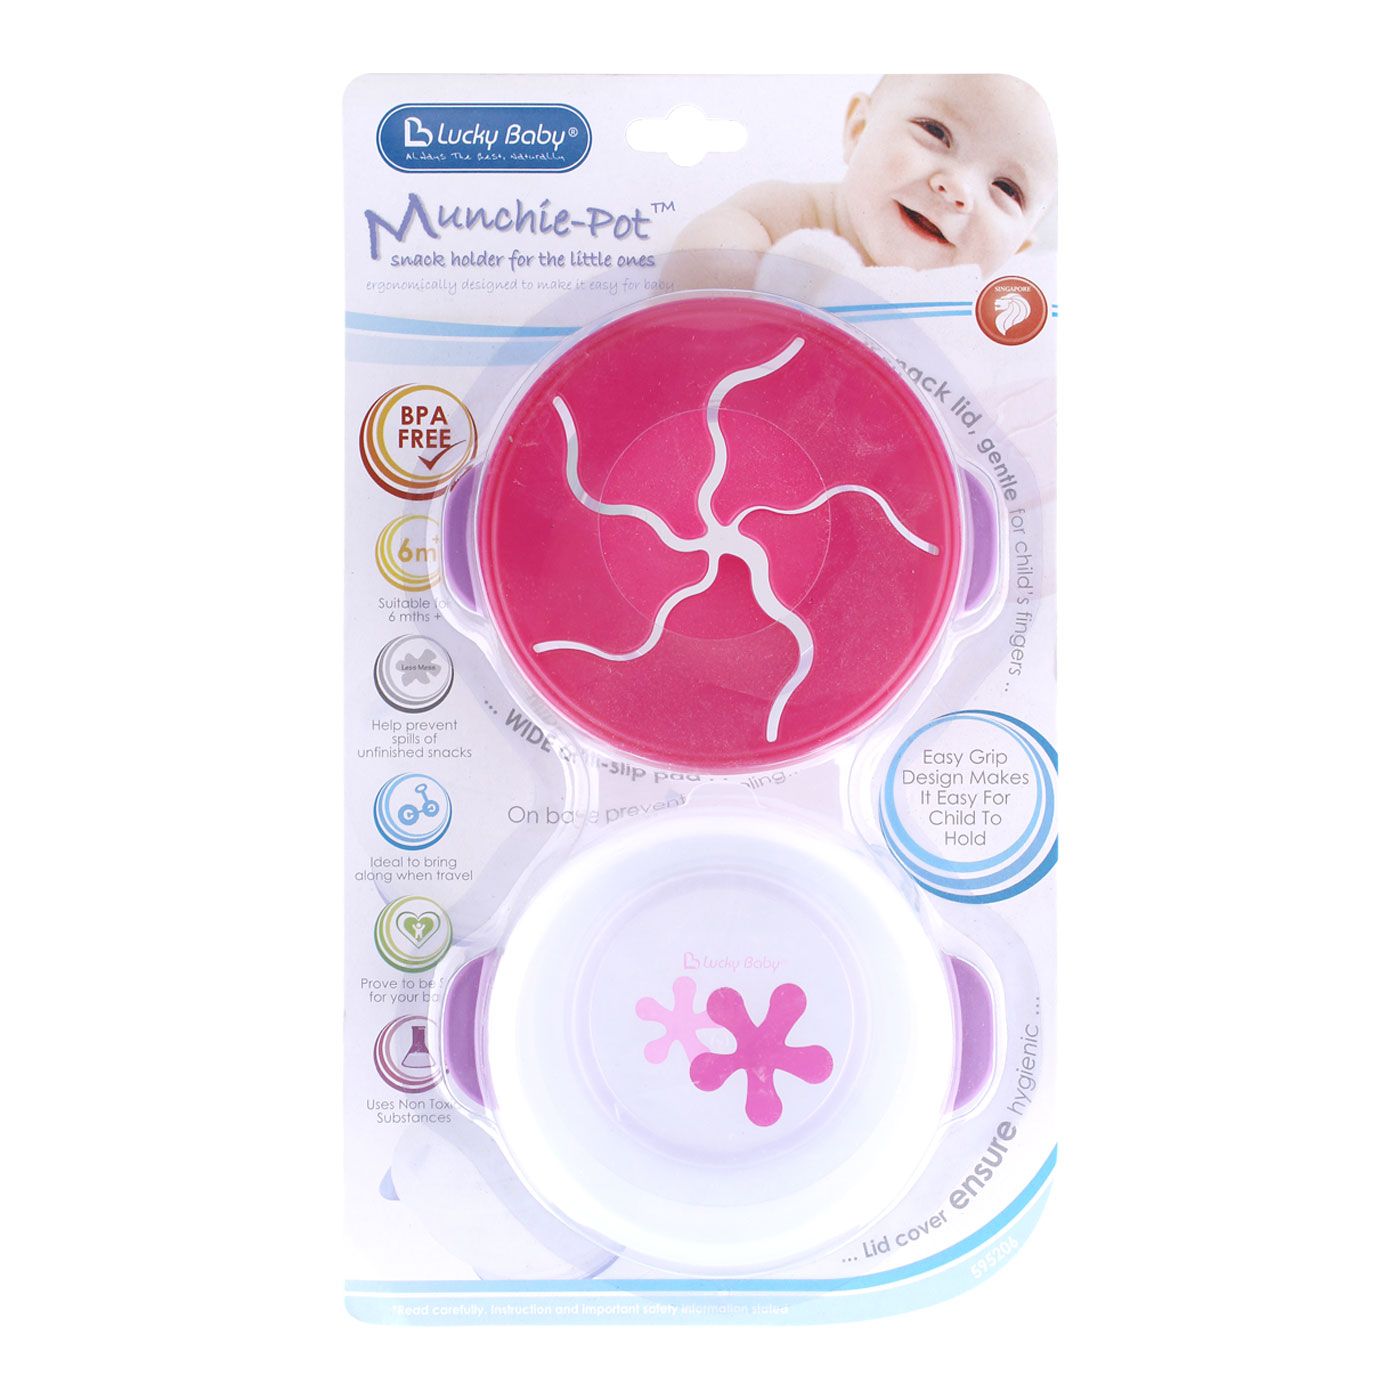 Lucky Baby Munchie Pot Snack Holder Pink - 1